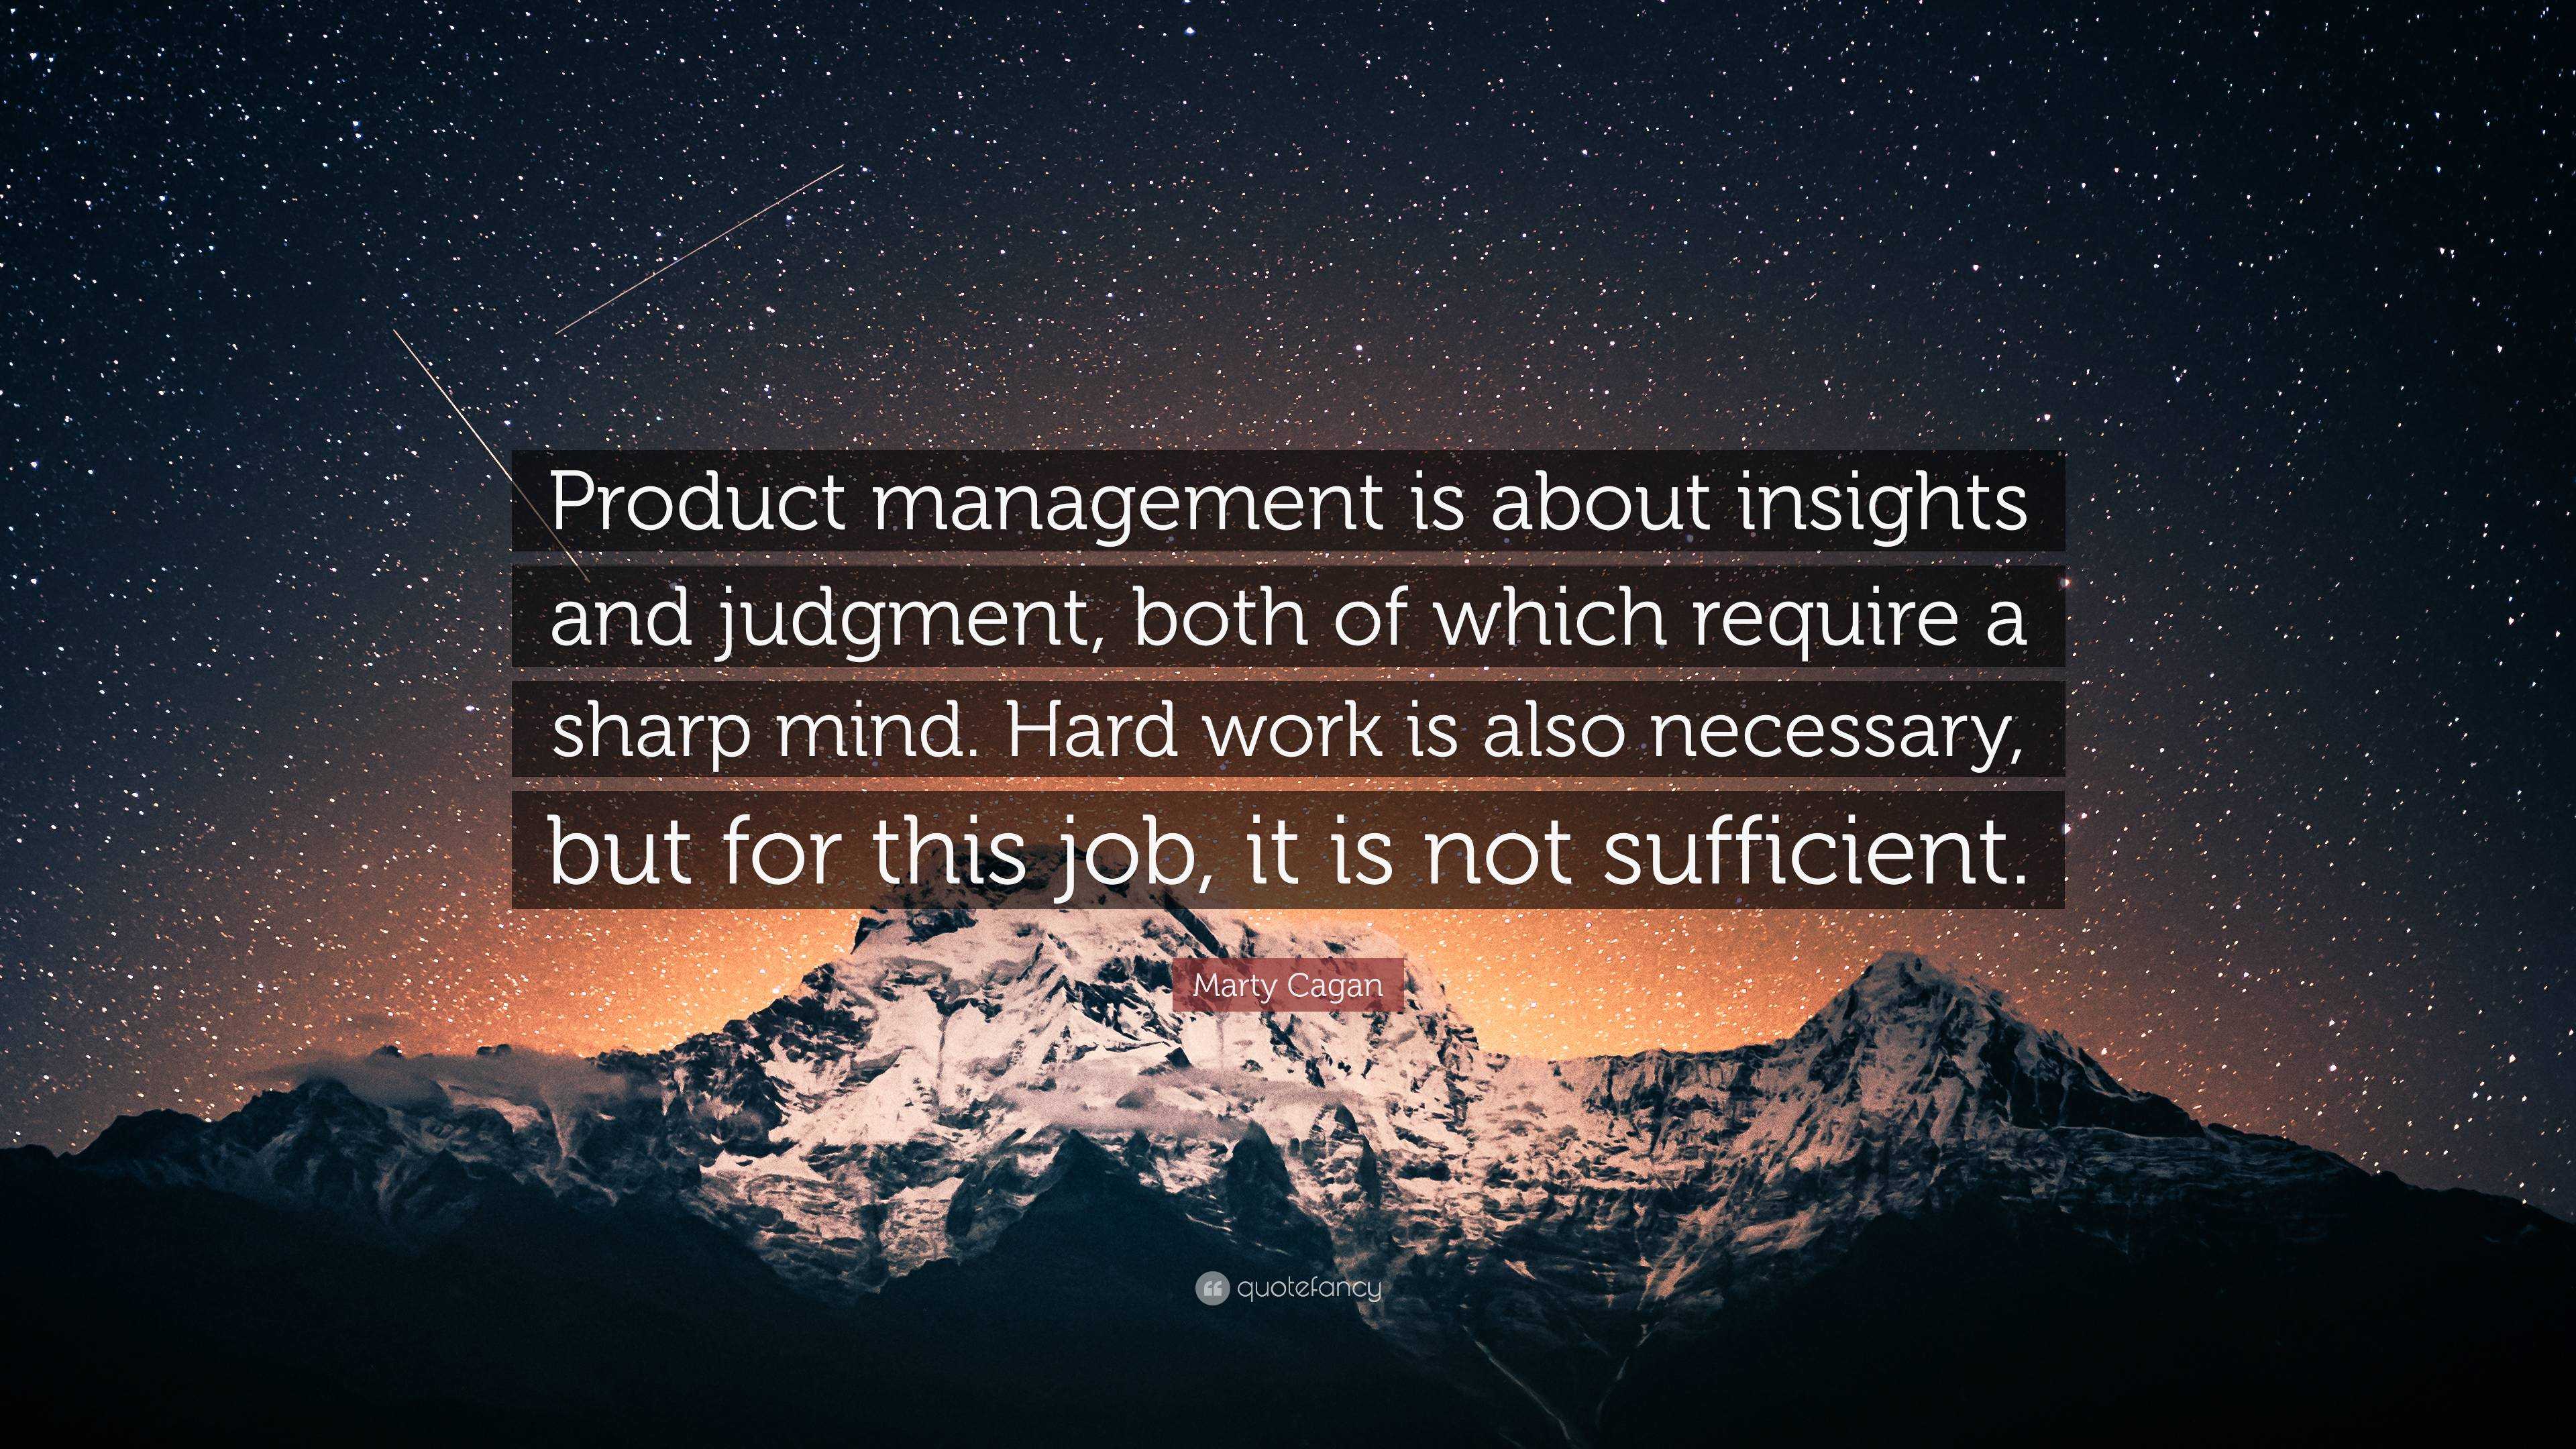 Marty Cagan Quote “Product management is about insights and judgment